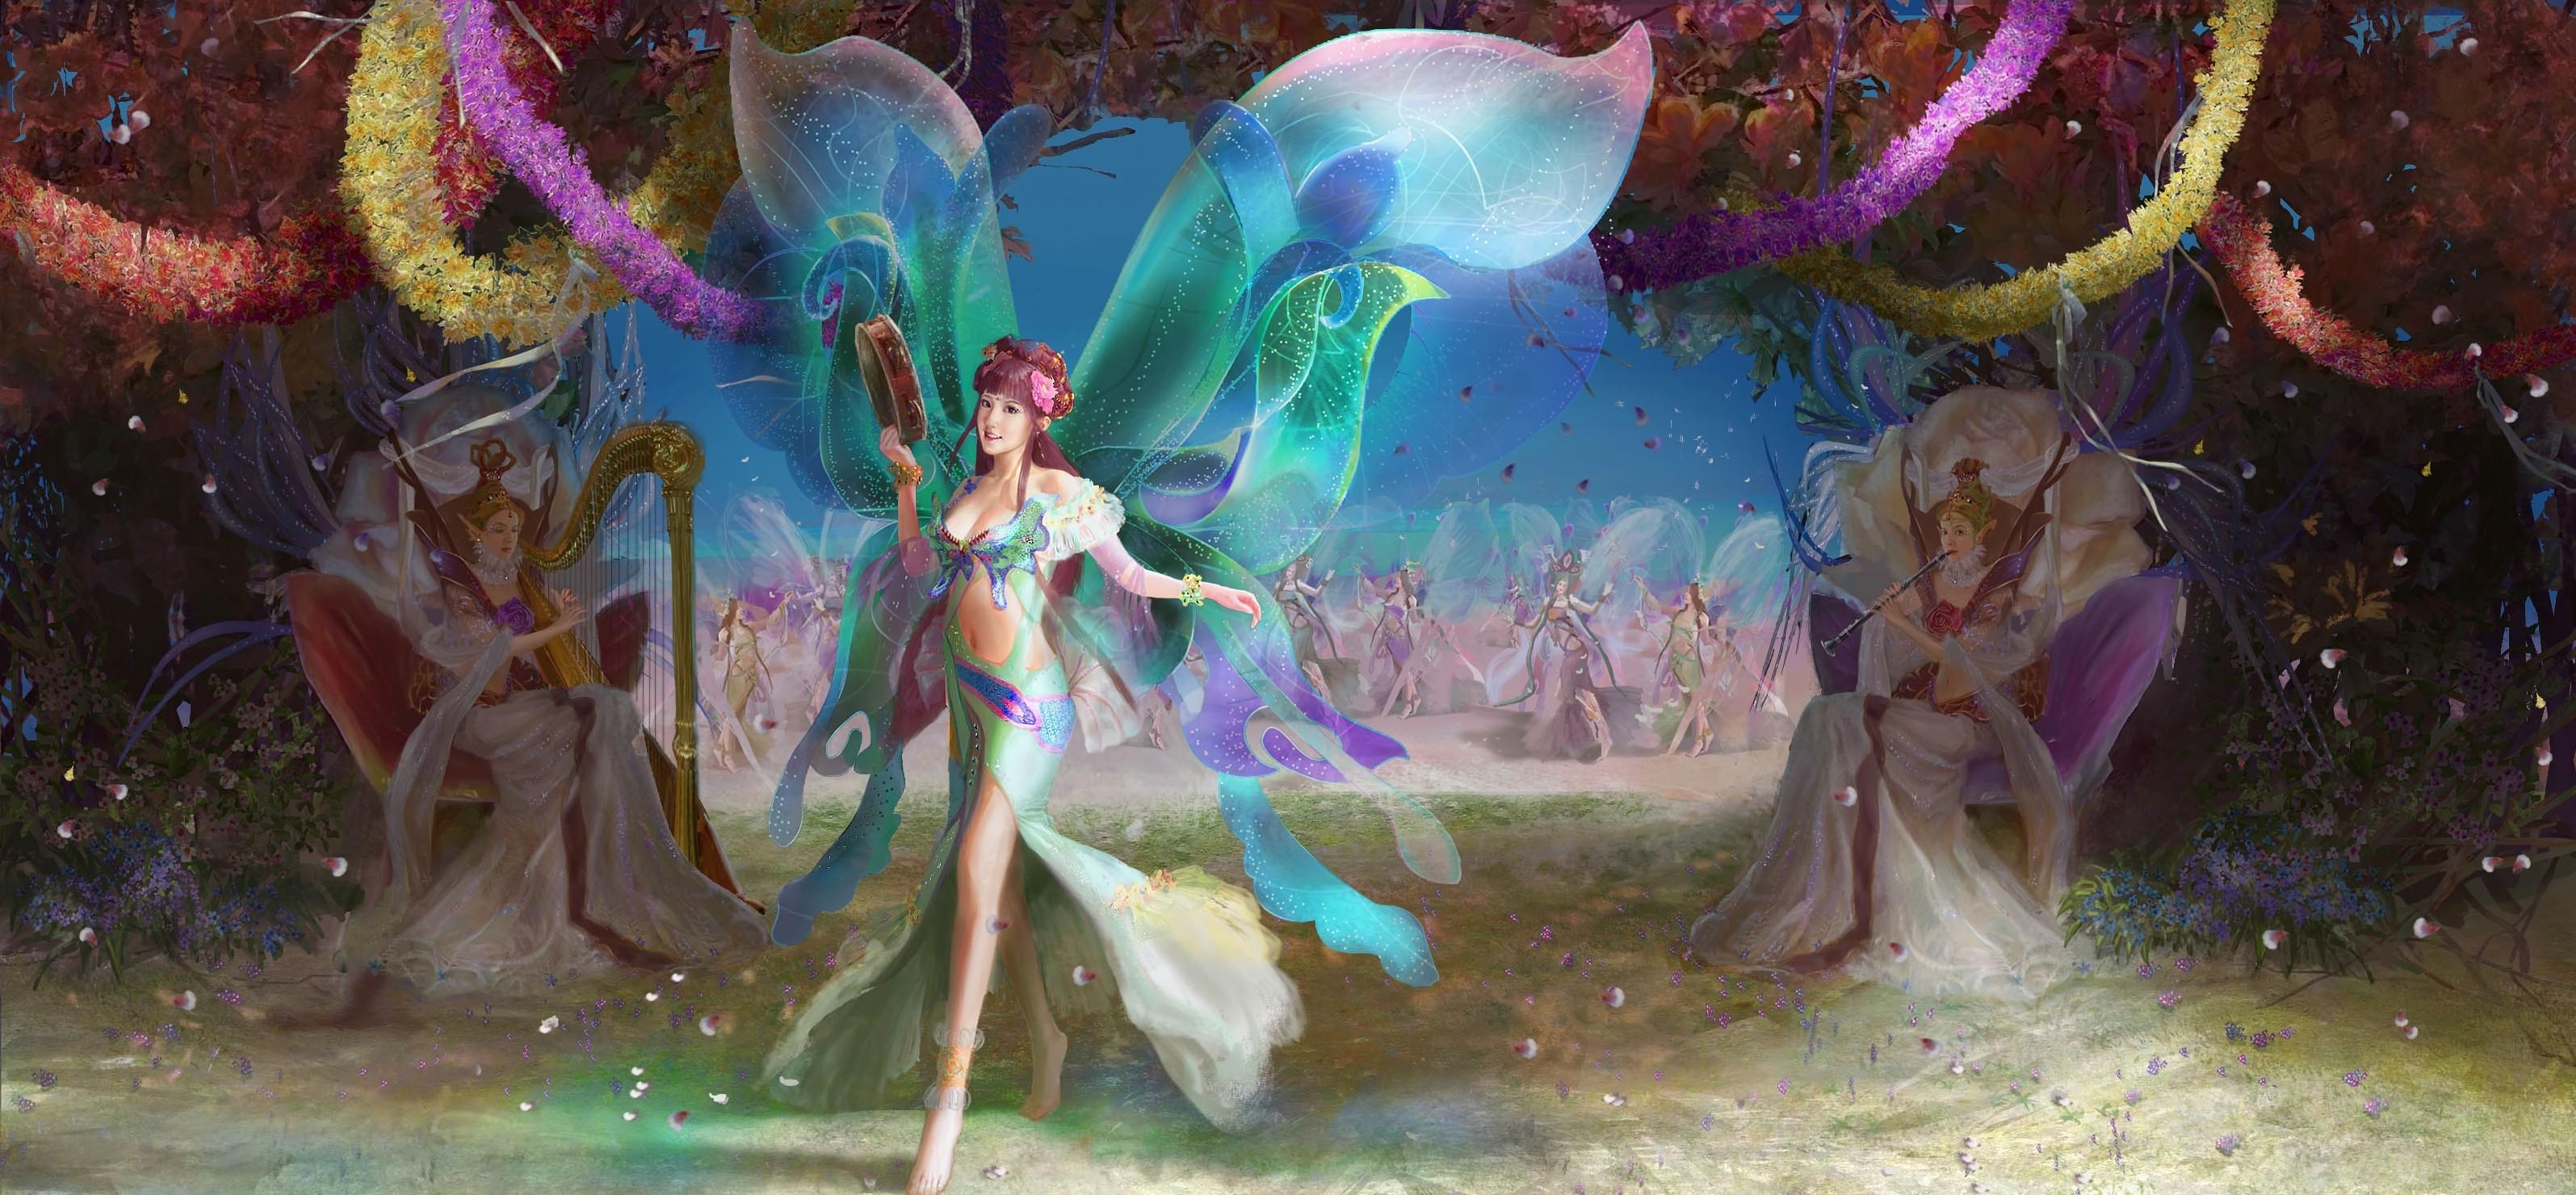 wings, flowers, fantasy, holiday, musical instruments, fairies